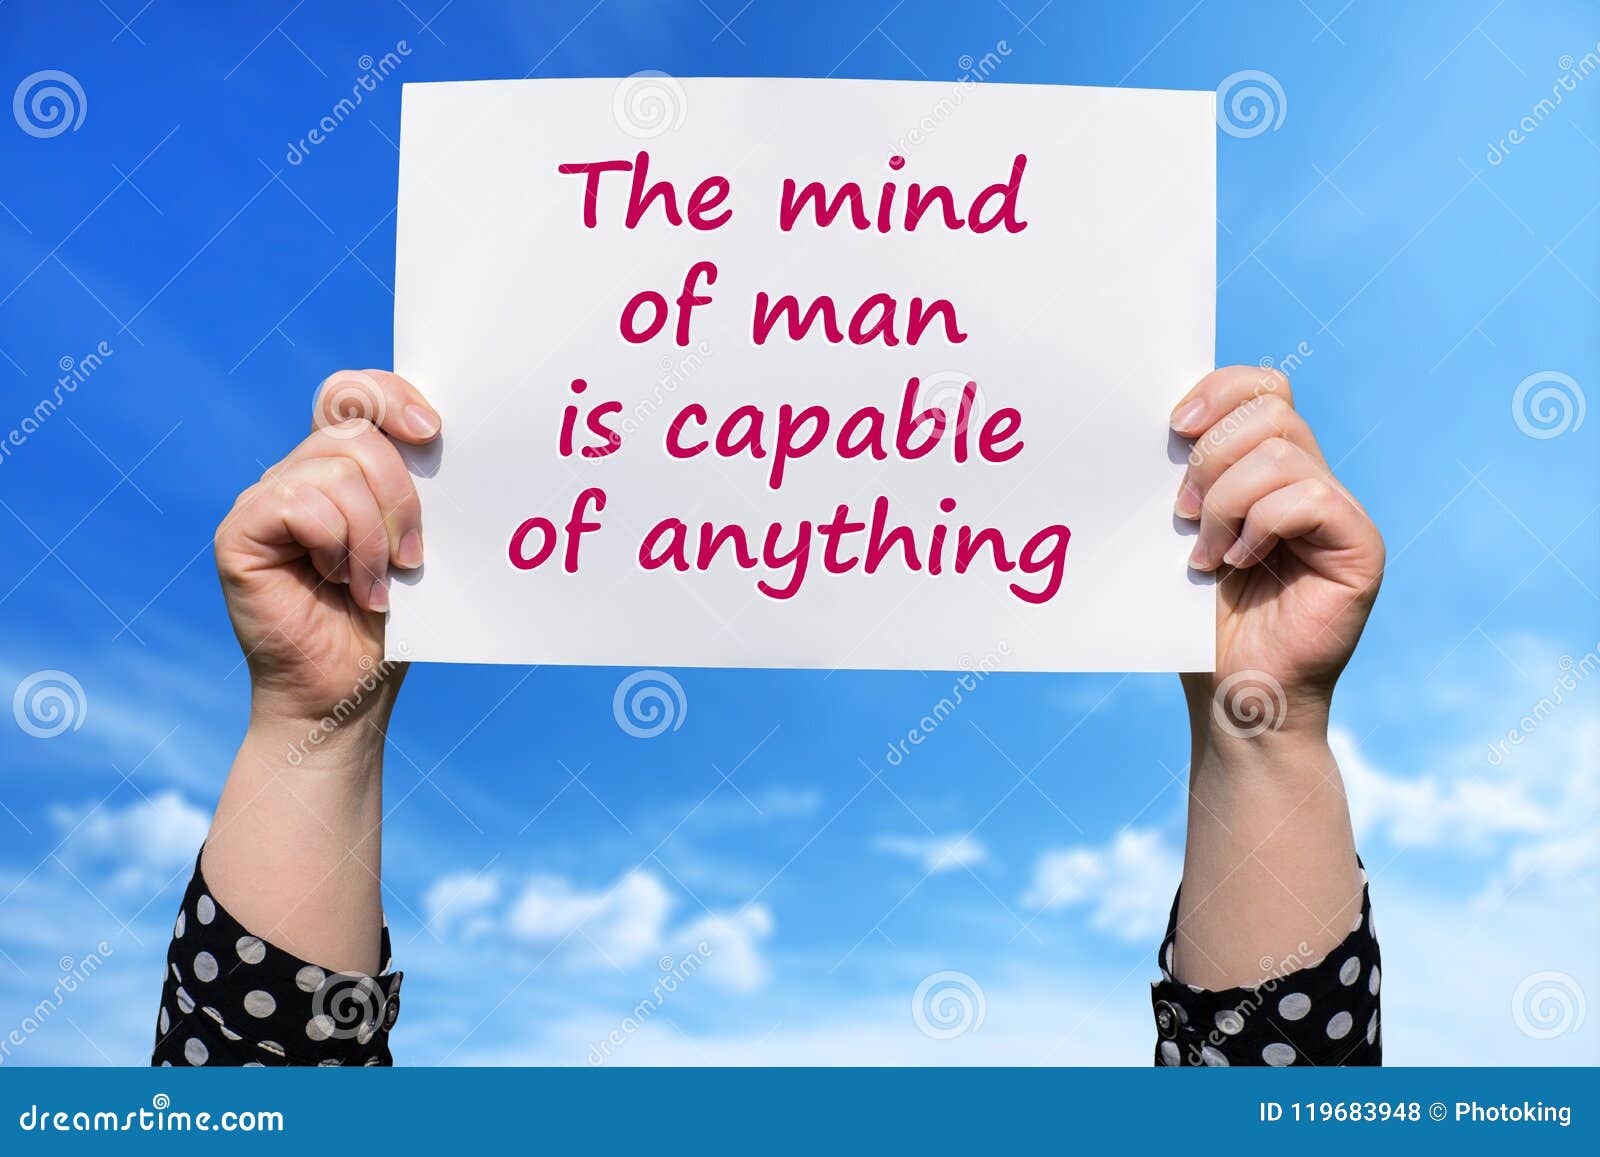 the mind of man is capable of anything